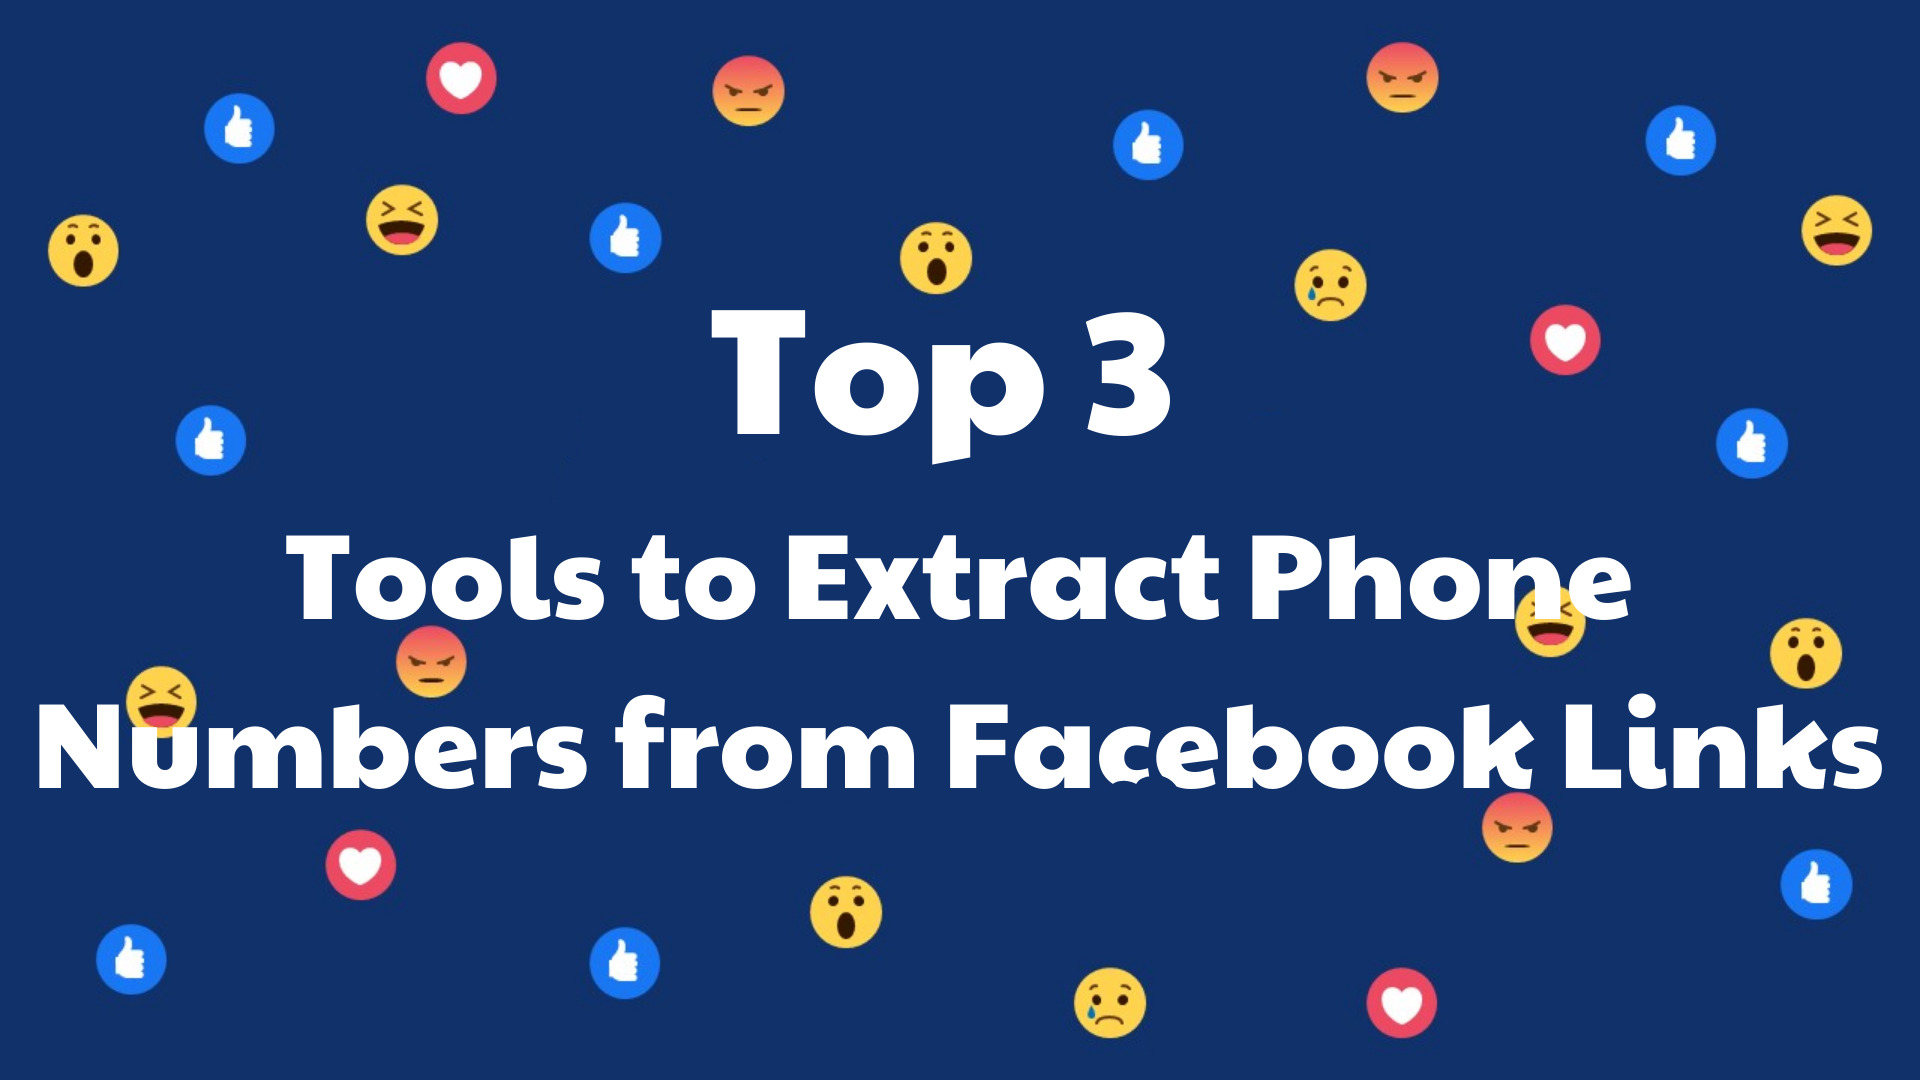 Top 3 Tools to Extract Phone Numbers from Facebook Links